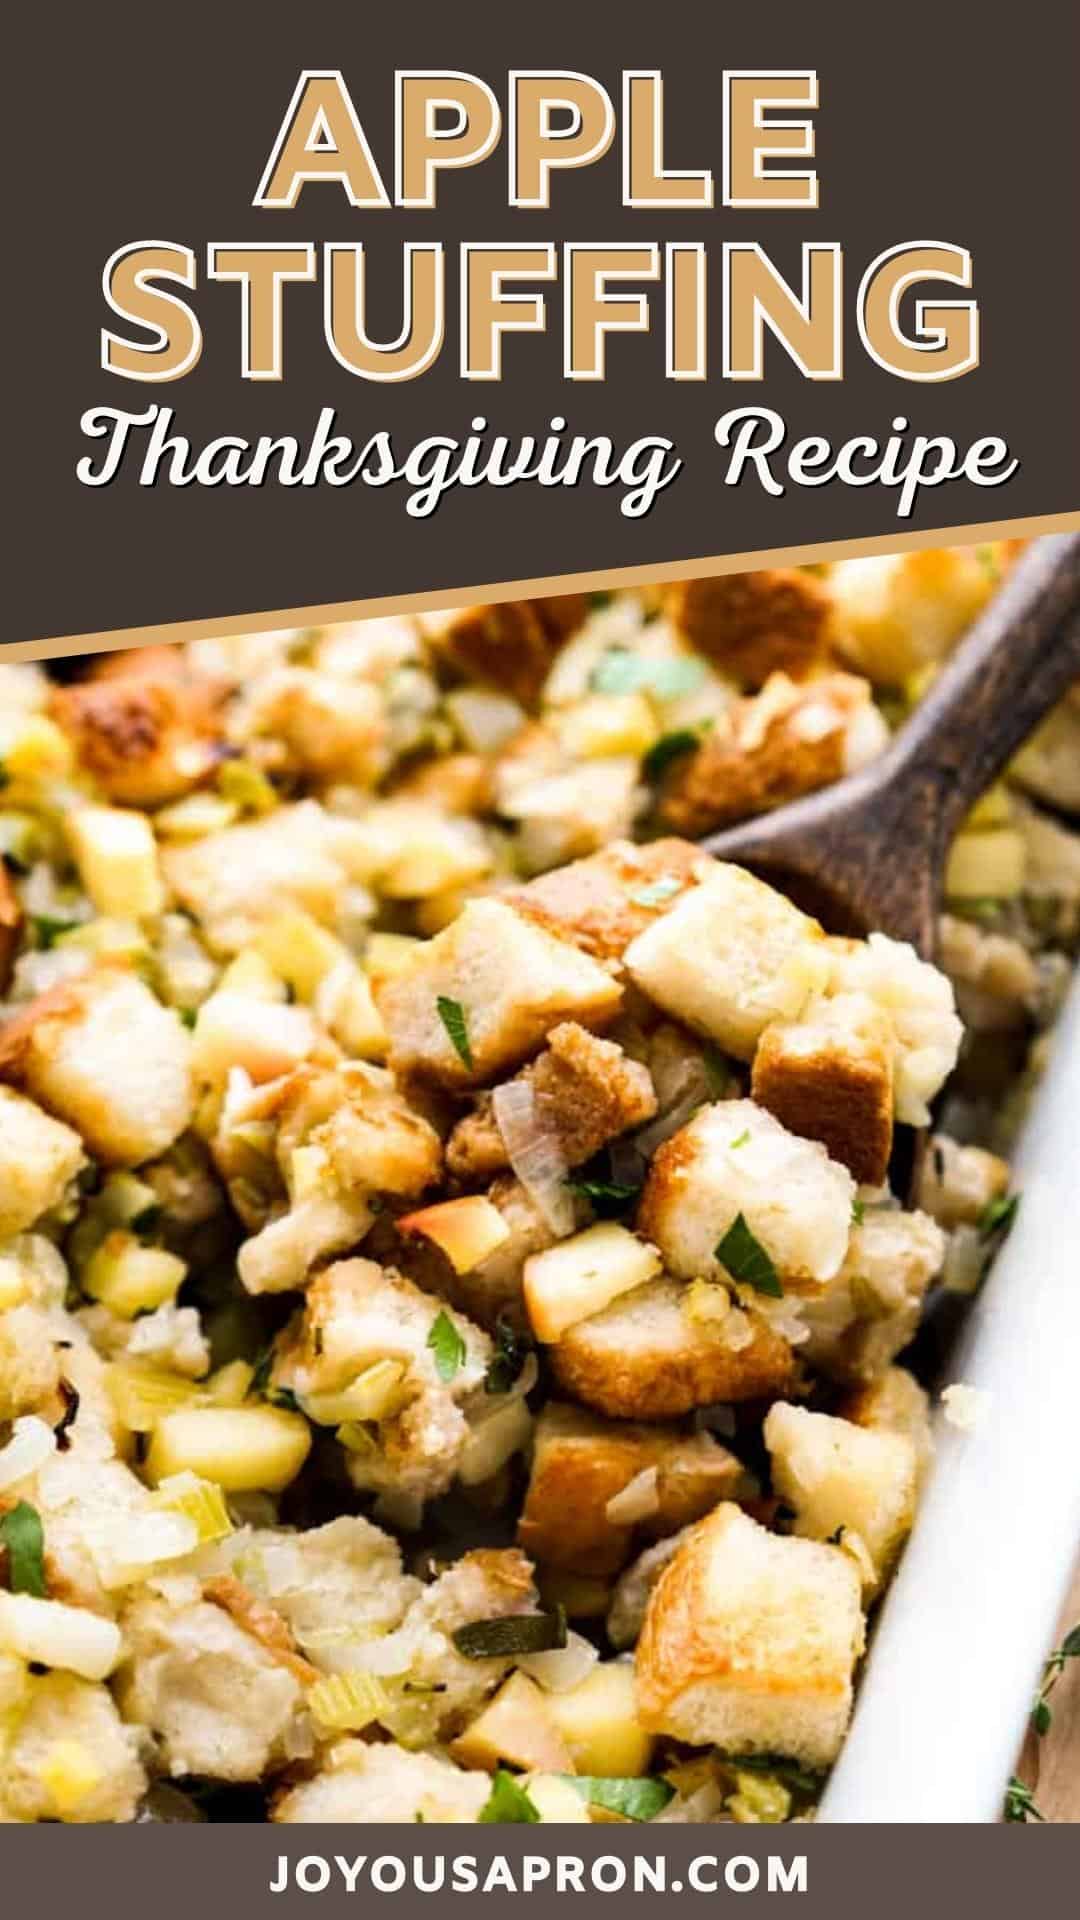 Apple Stuffing - this classic Thanksgiving stuffing recipe is tossed with apples, celery, and onions in a buttery herb dressing. Such a flavorful and delicious takes on the popular holiday side dish. via @joyousapron